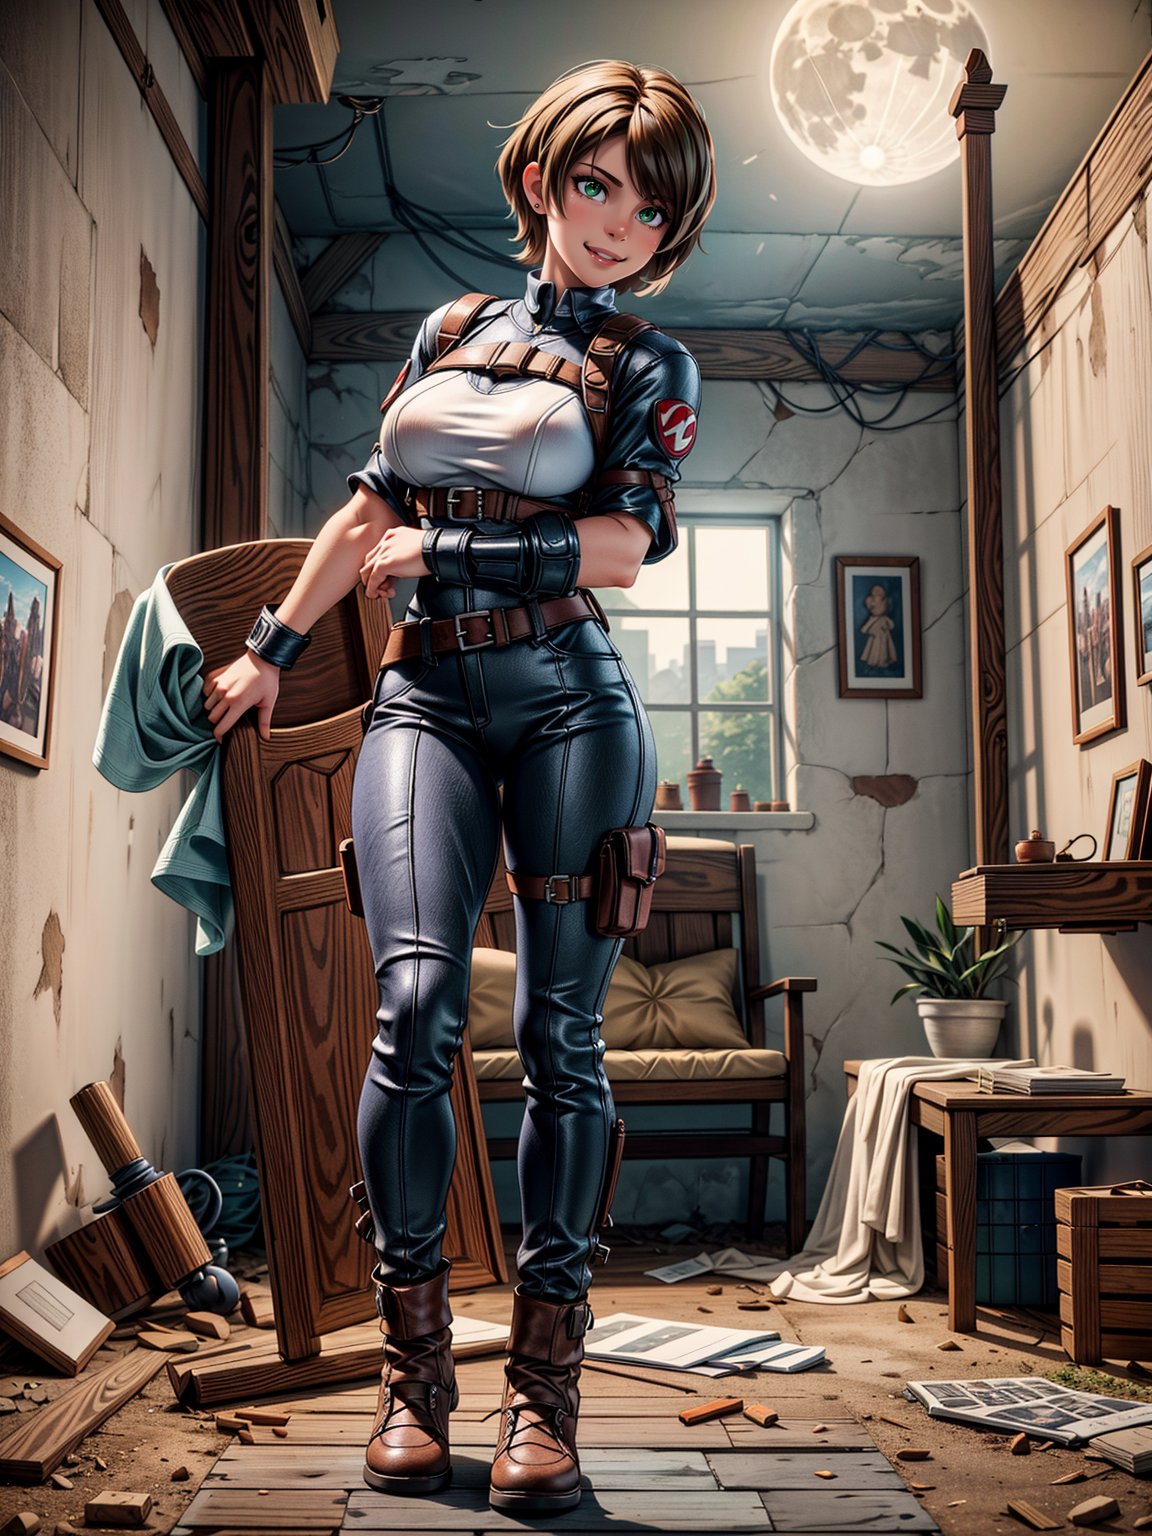 1woman, white T-shirt and long brown leather pants, black boot, extremely erotic clothing, extremely gigantic breasts, brown hair, very short hair, straight hair, hair with bangs in front of the eyes, looking at the viewer, (((erotic pose interacting and leaning on something))), in an old house all destroyed with lots of furniture, altars, window showing a village at night and a full moon at the top right, ((full body):1.5), ((Resident Evil 4)),16k, UHD, best possible quality, ((ultra detailed):1.2), best possible resolution, Unreal Engine 5, professional photography, perfect_hands